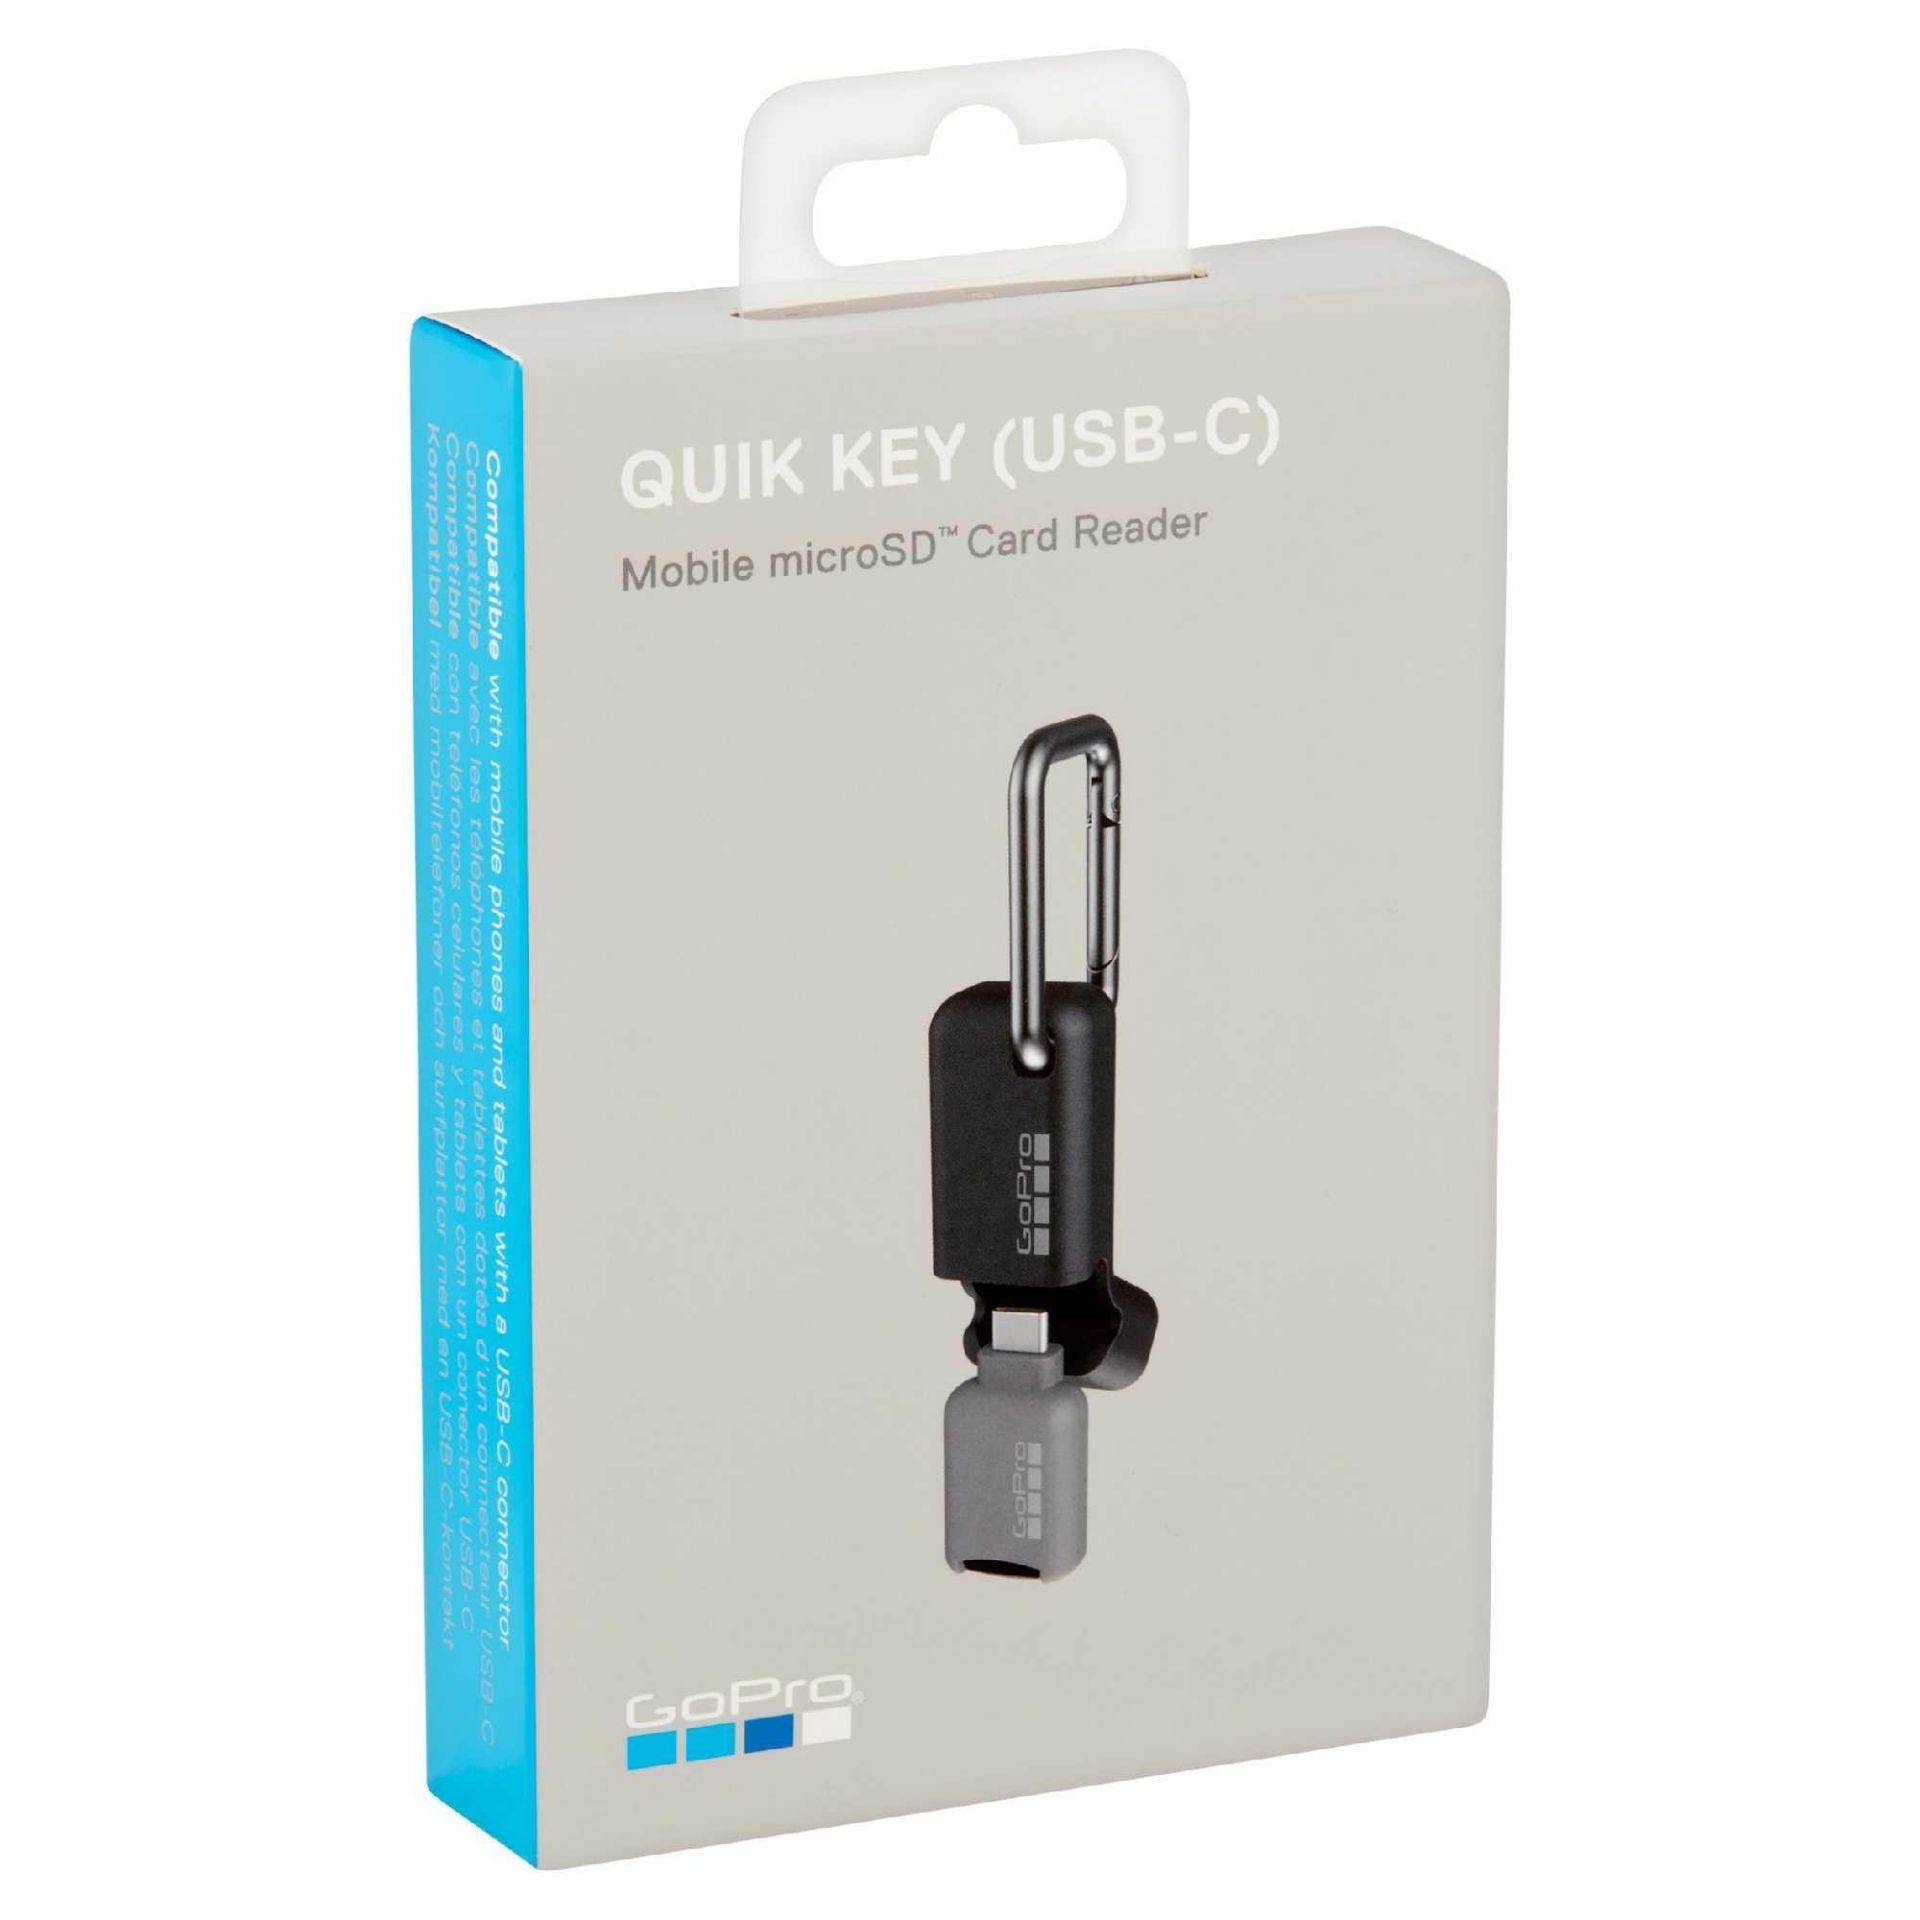 RRP £120 Lot To Contain 6 Boxed Brand New Boxed Gopro Quick Key (Usb-C) Mobile Microsd Card Reader